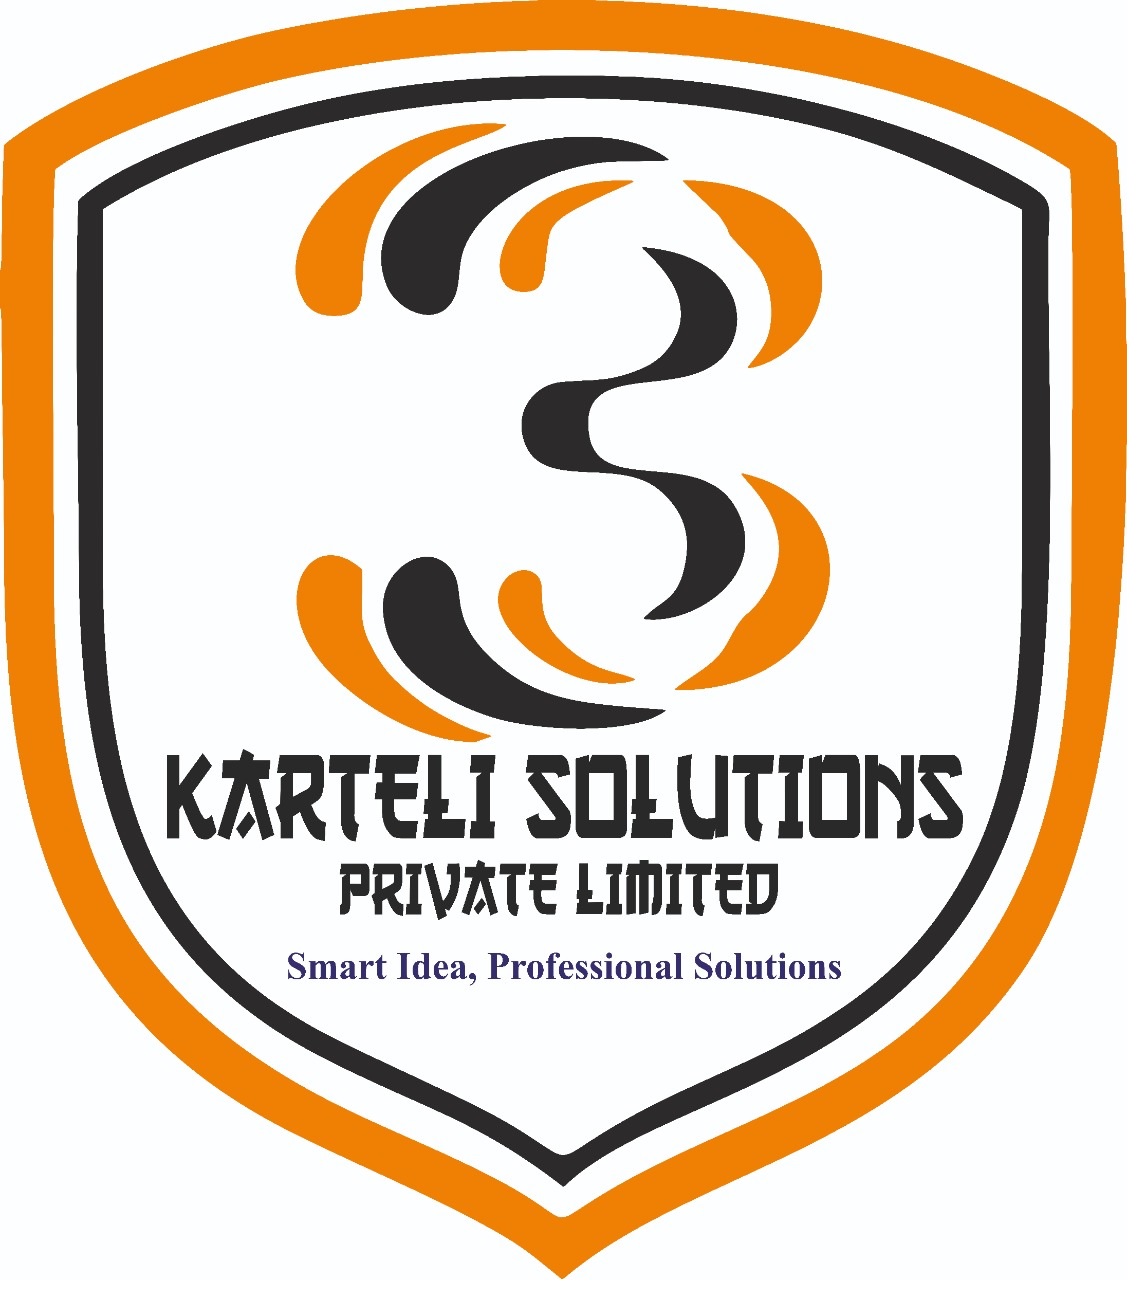 KARTELI SOLUTIONS PRIVATE LIMITED